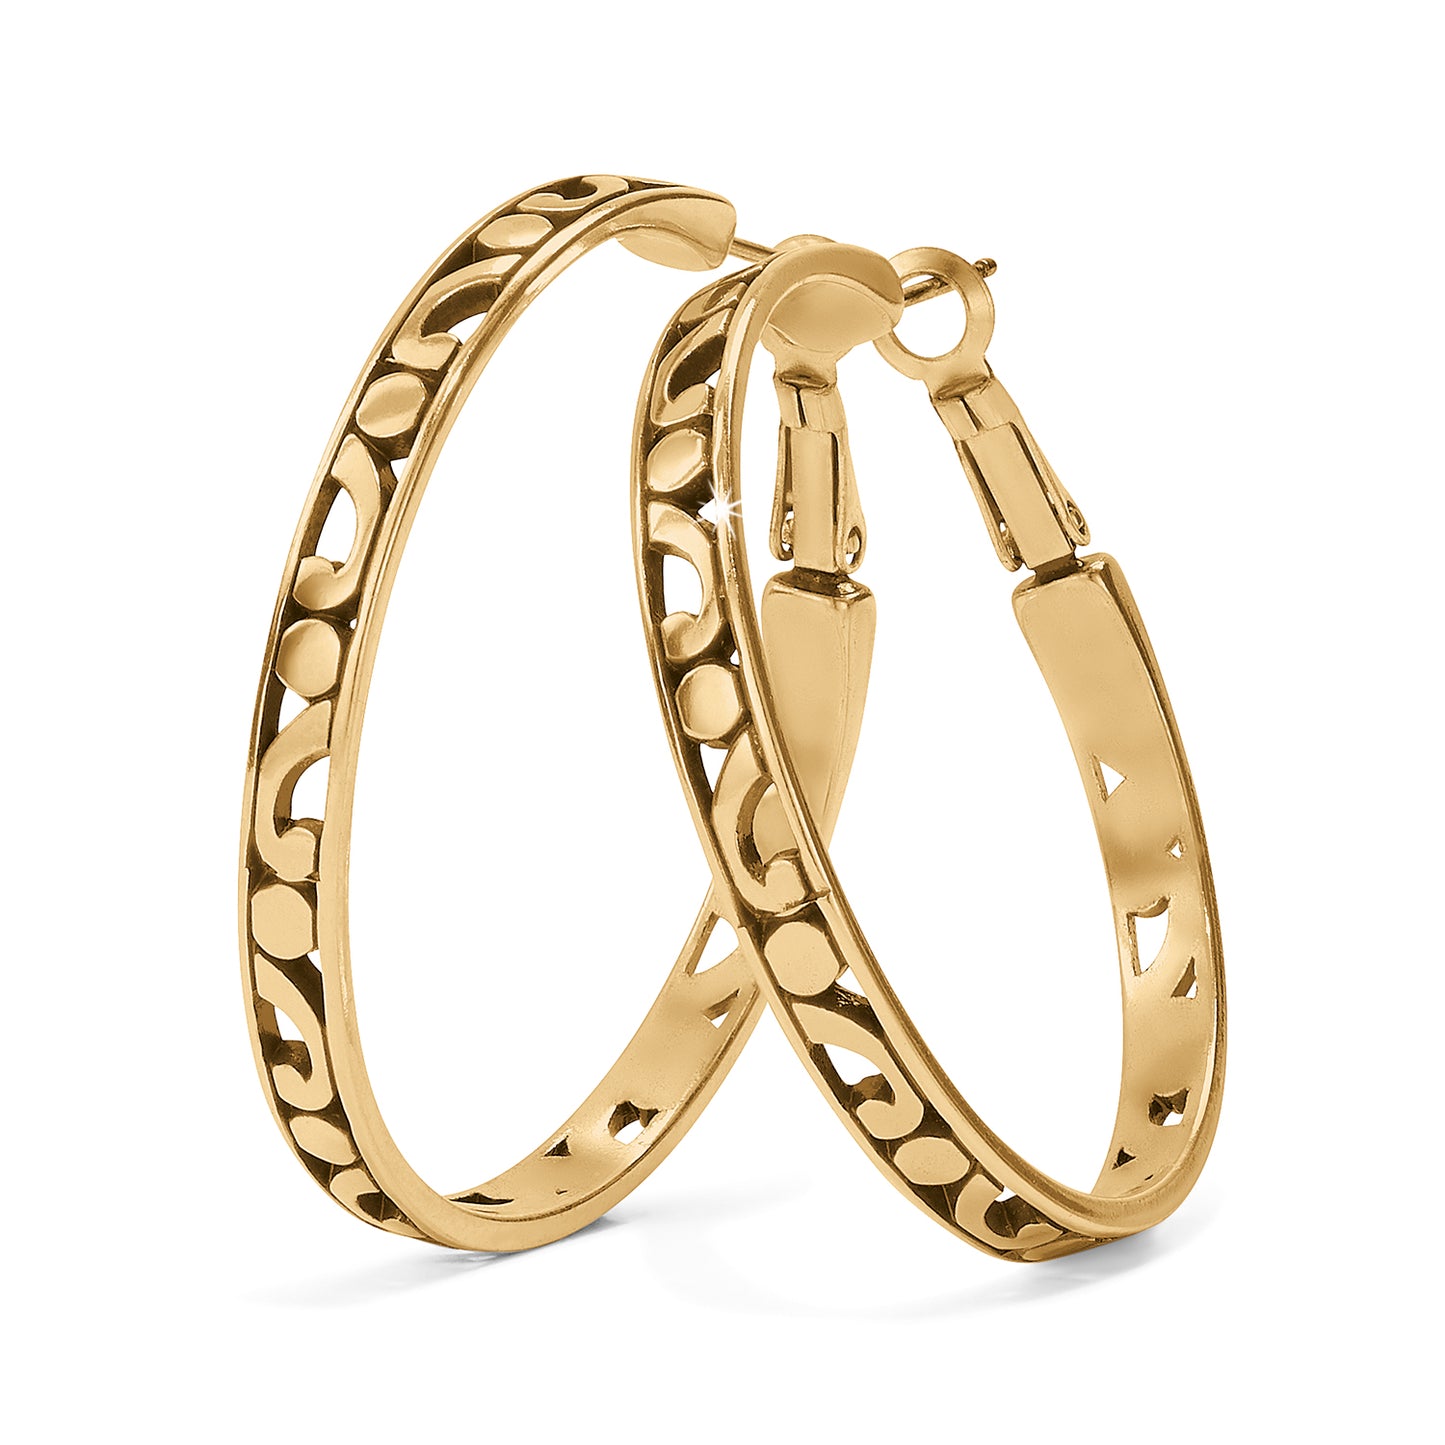 Contempo Large Hoop Earrings, Gold